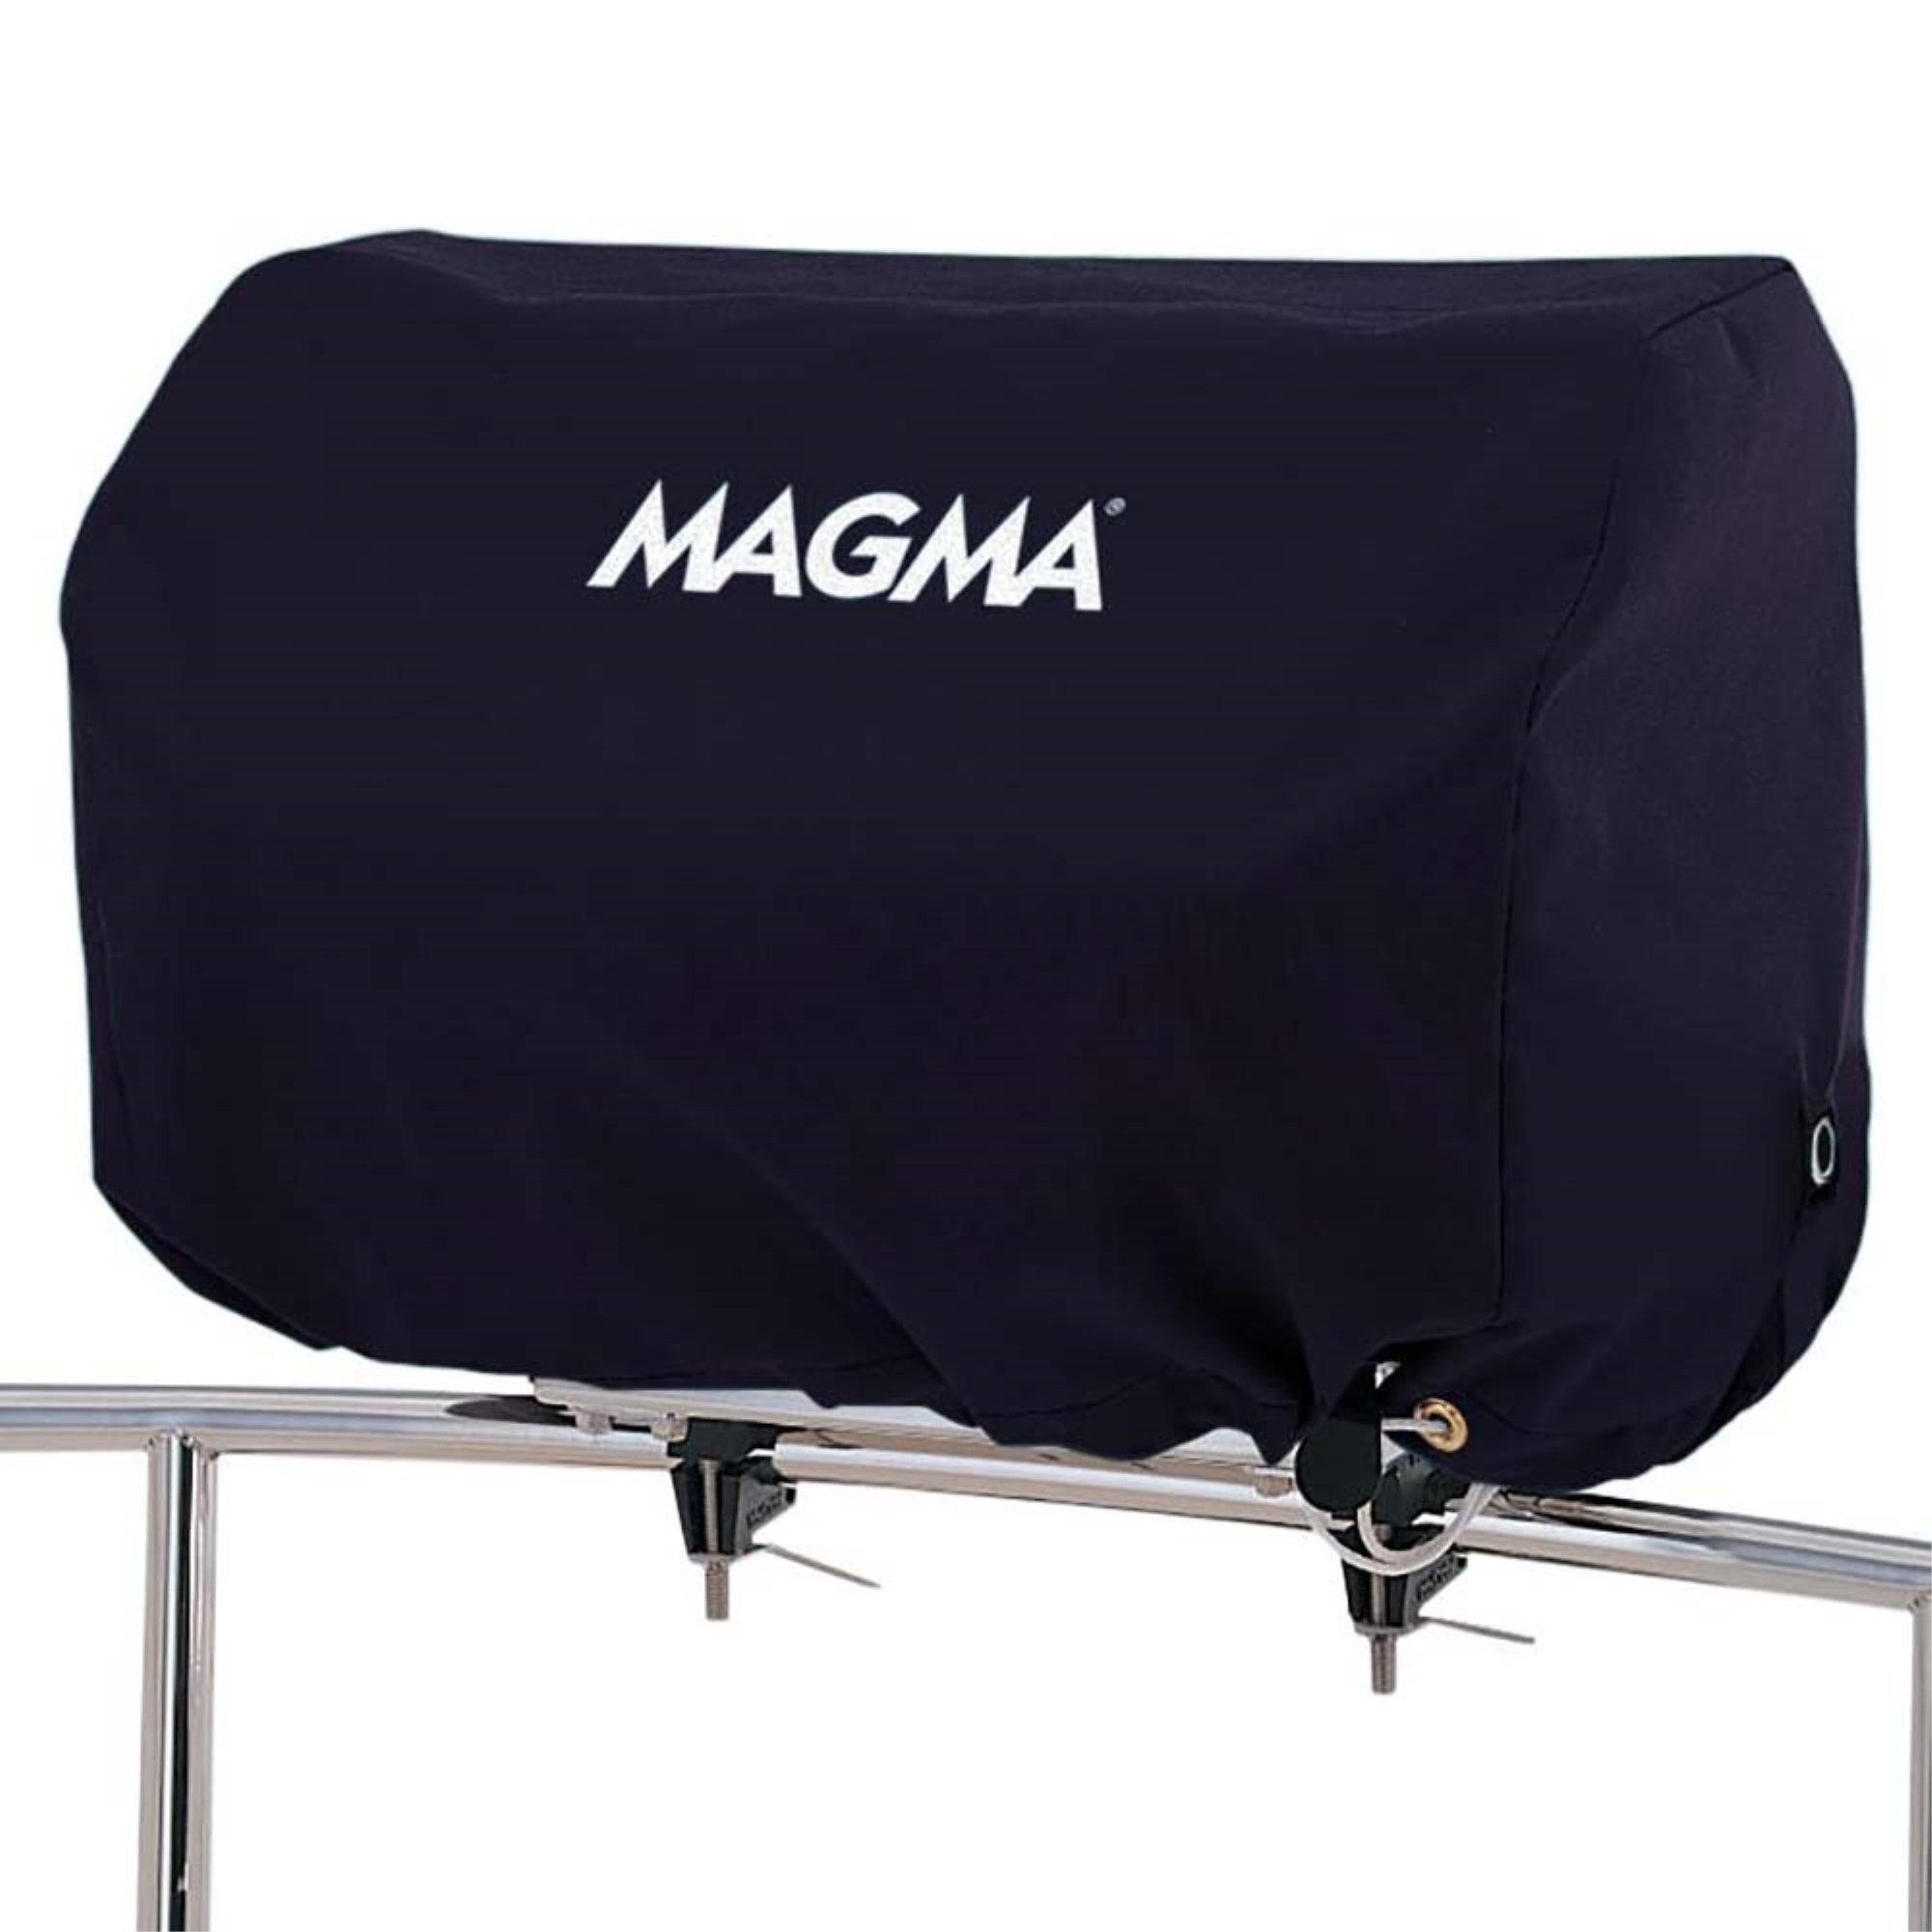 Magma Catalina BBQ Cover - Captians Navy A10-1290CN - image 2 of 2